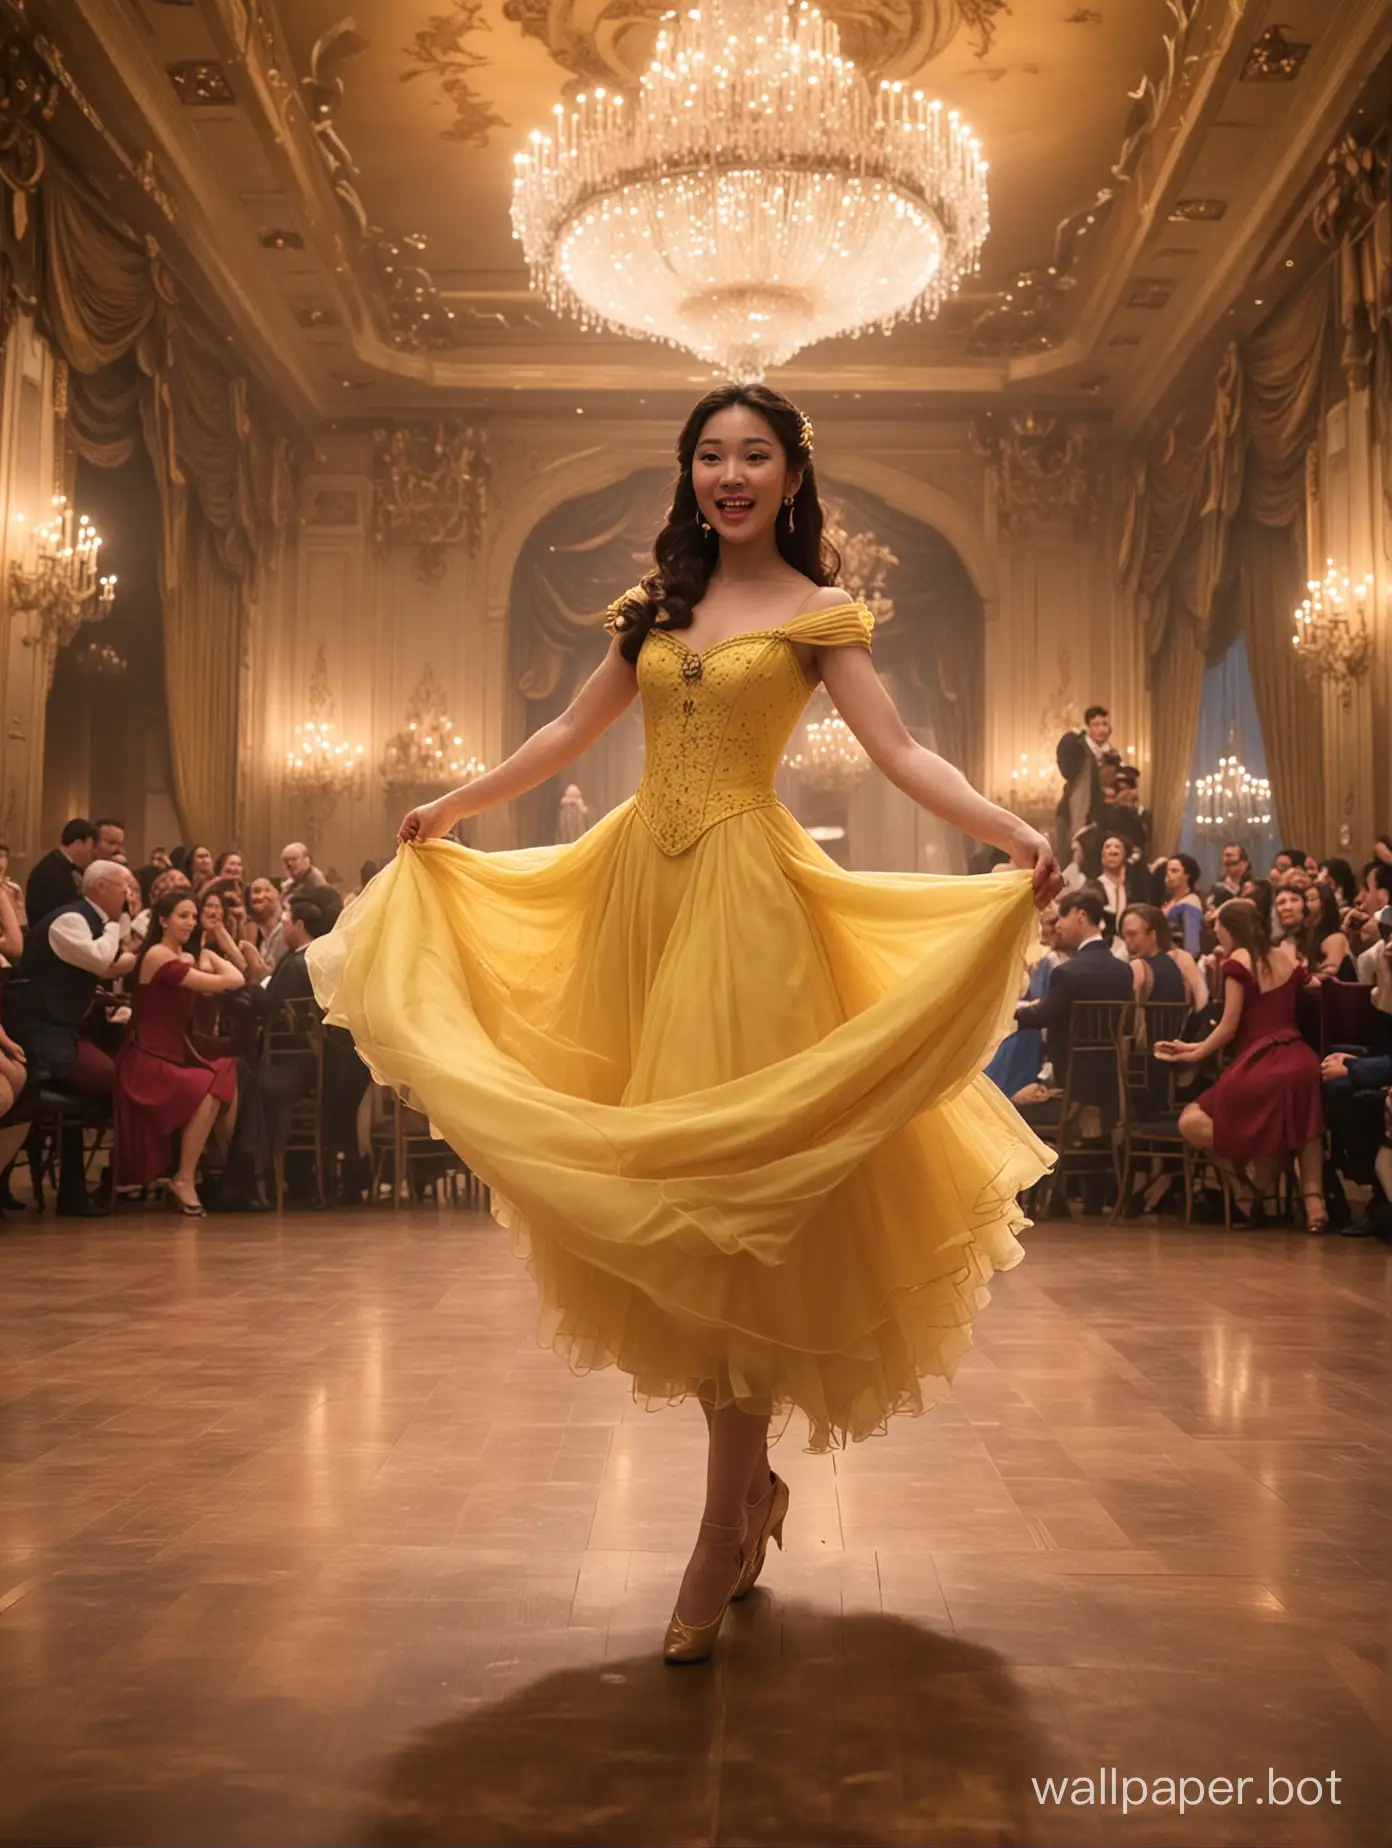 an asian 21 year old female Belle dancing in the ballroom of beauty and the beast